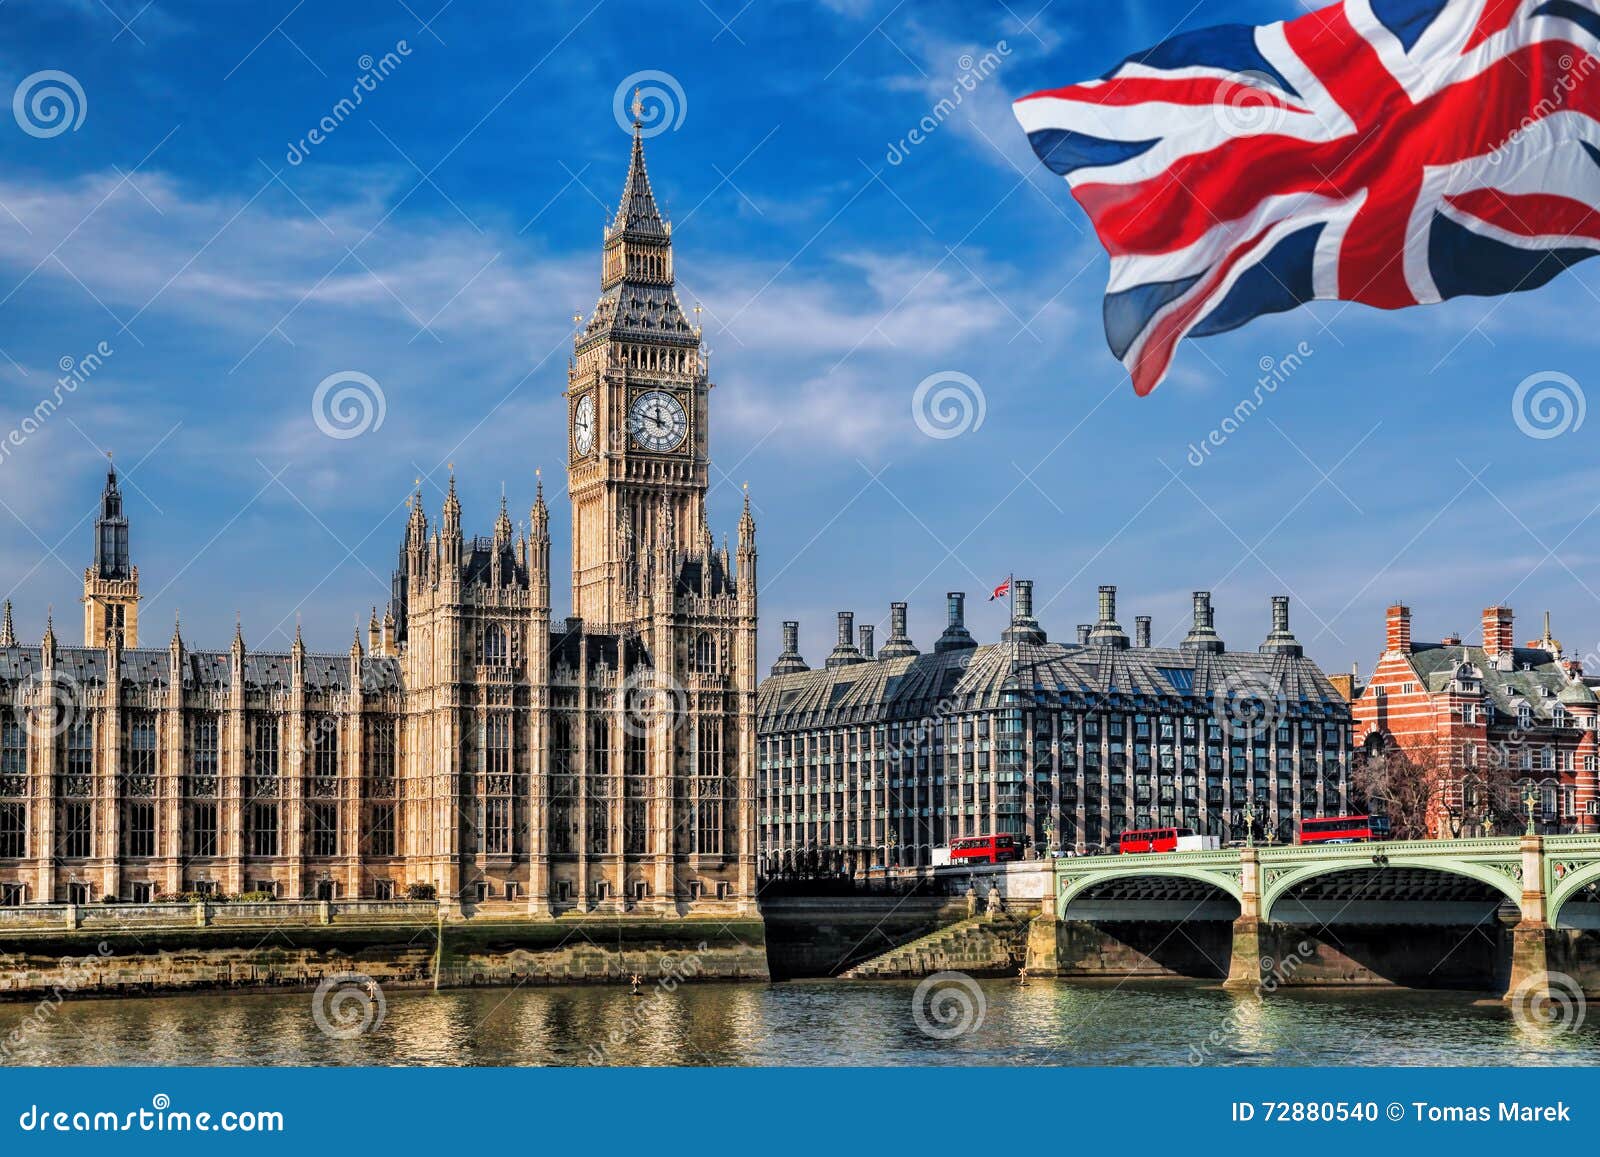 big ben with flag of united kingdom in london, uk